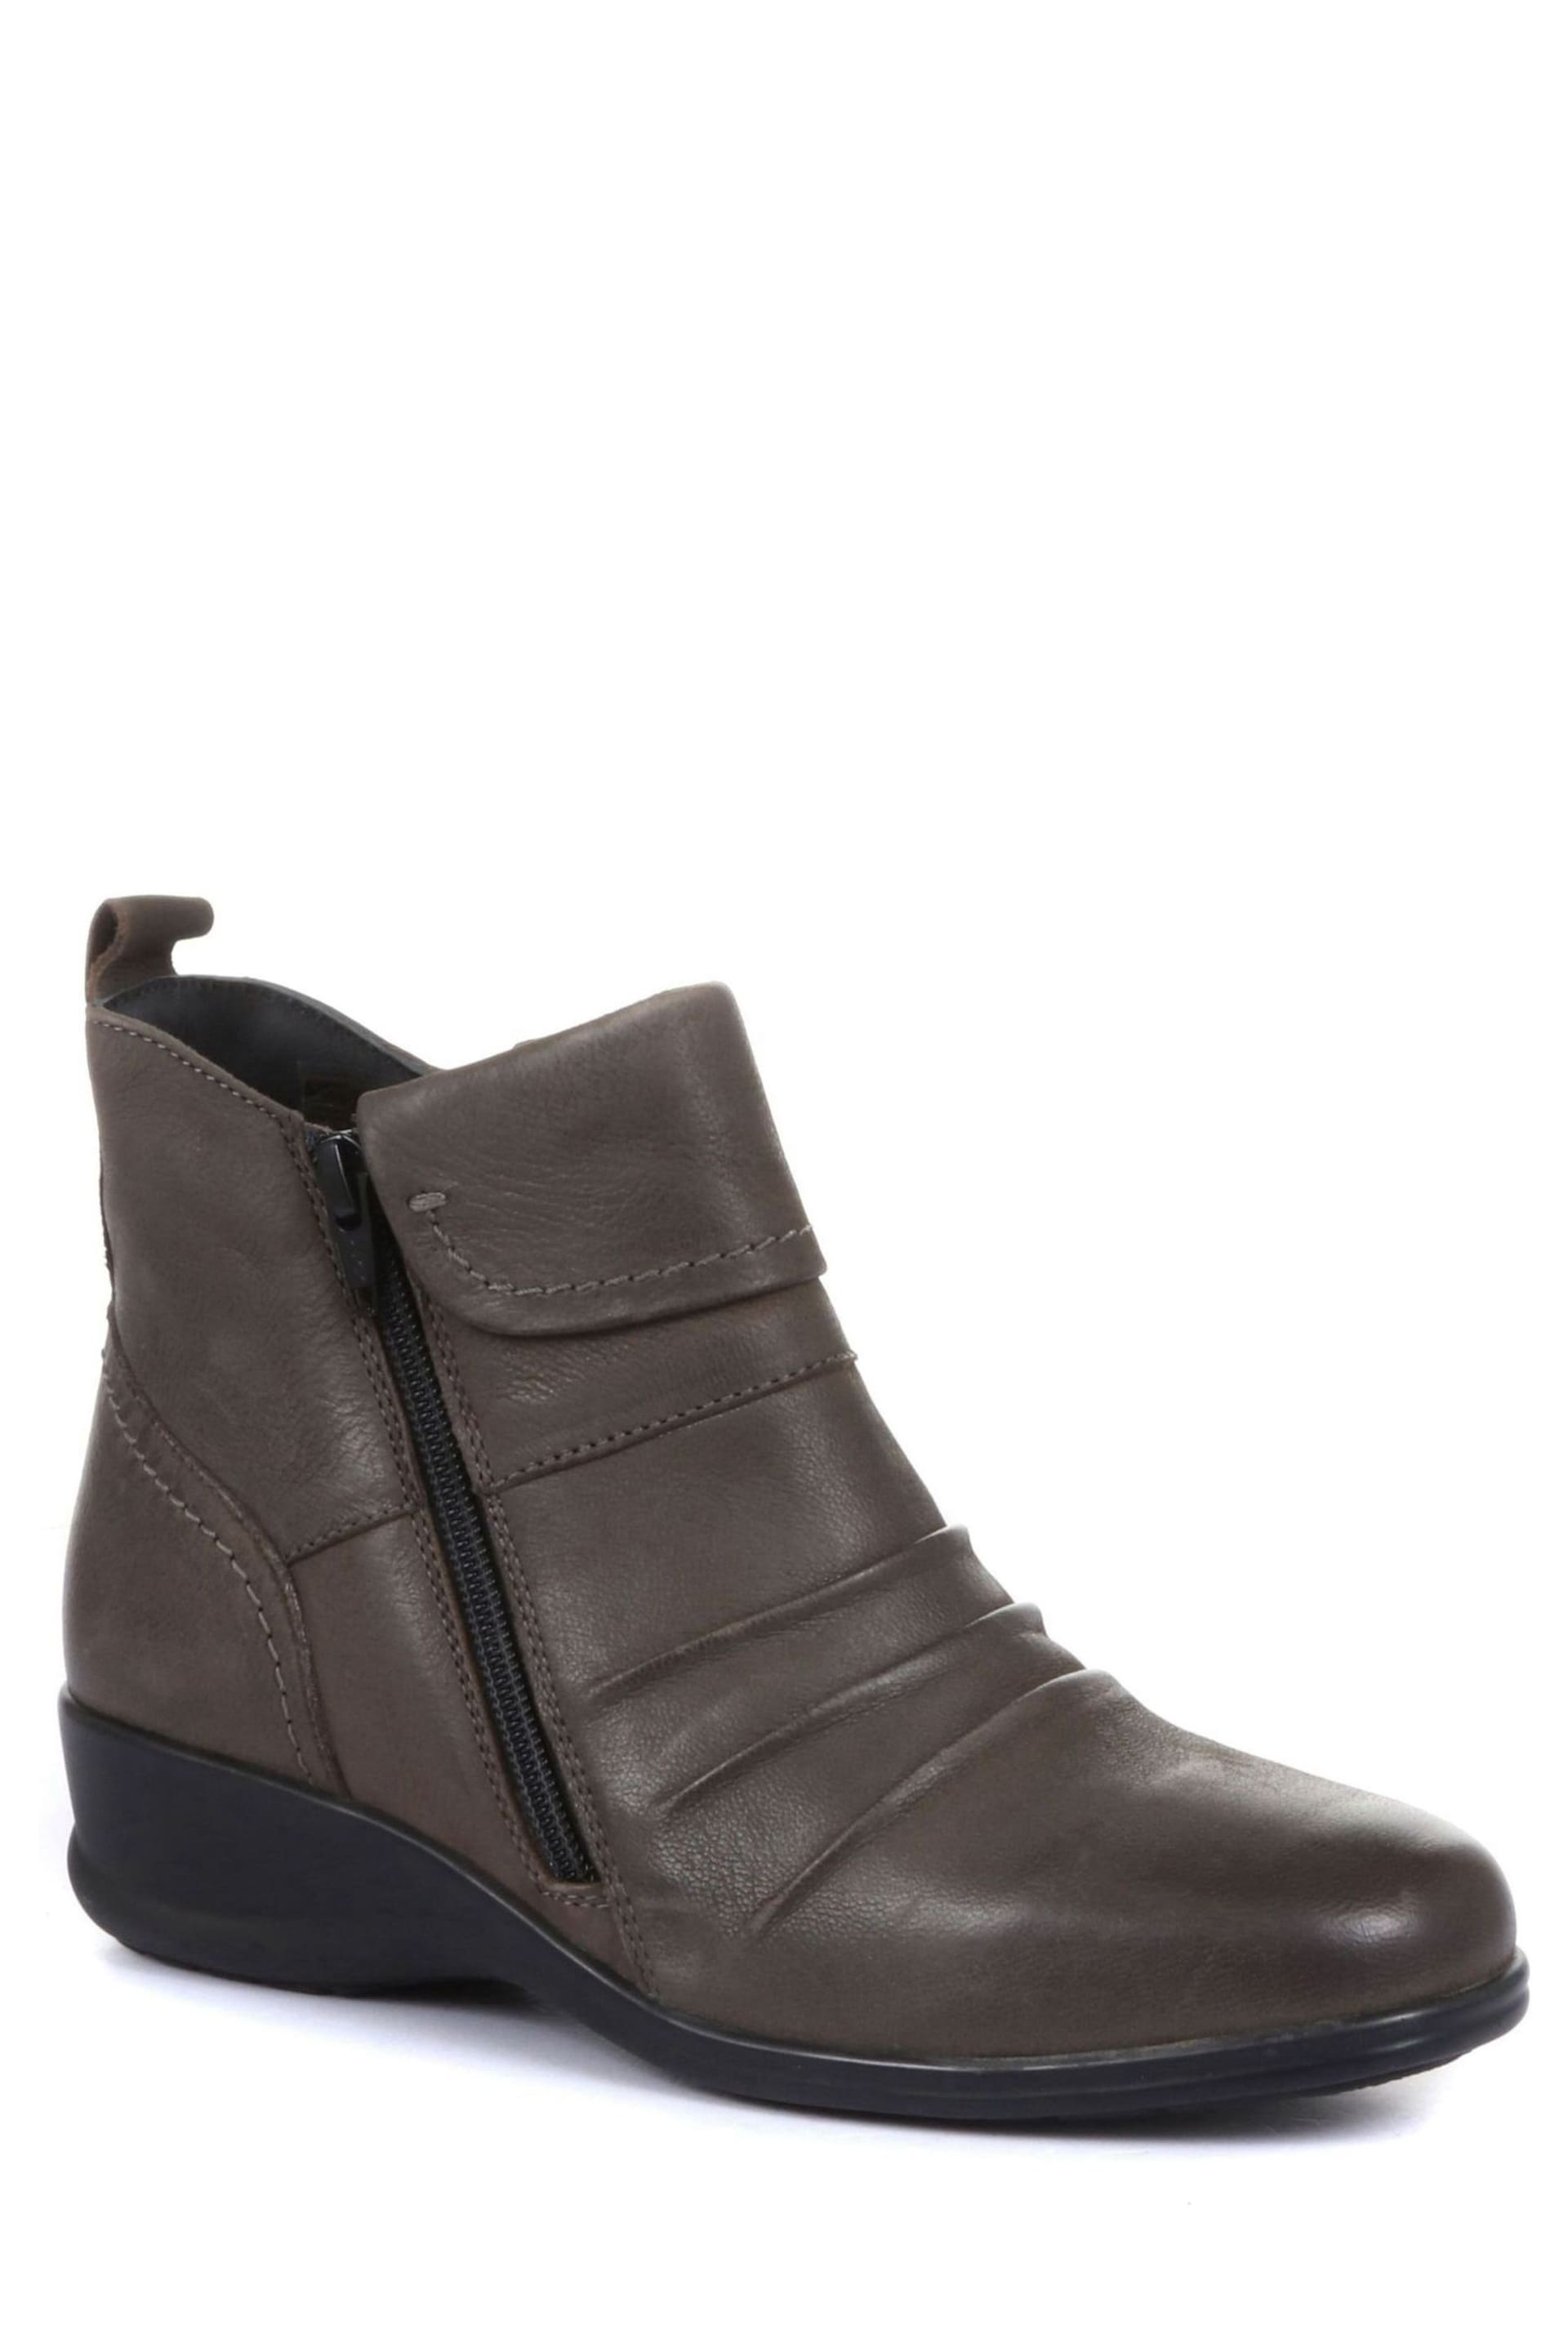 Pavers Grey Ladies Dual Zip Leather Ankle Boots - Image 2 of 5